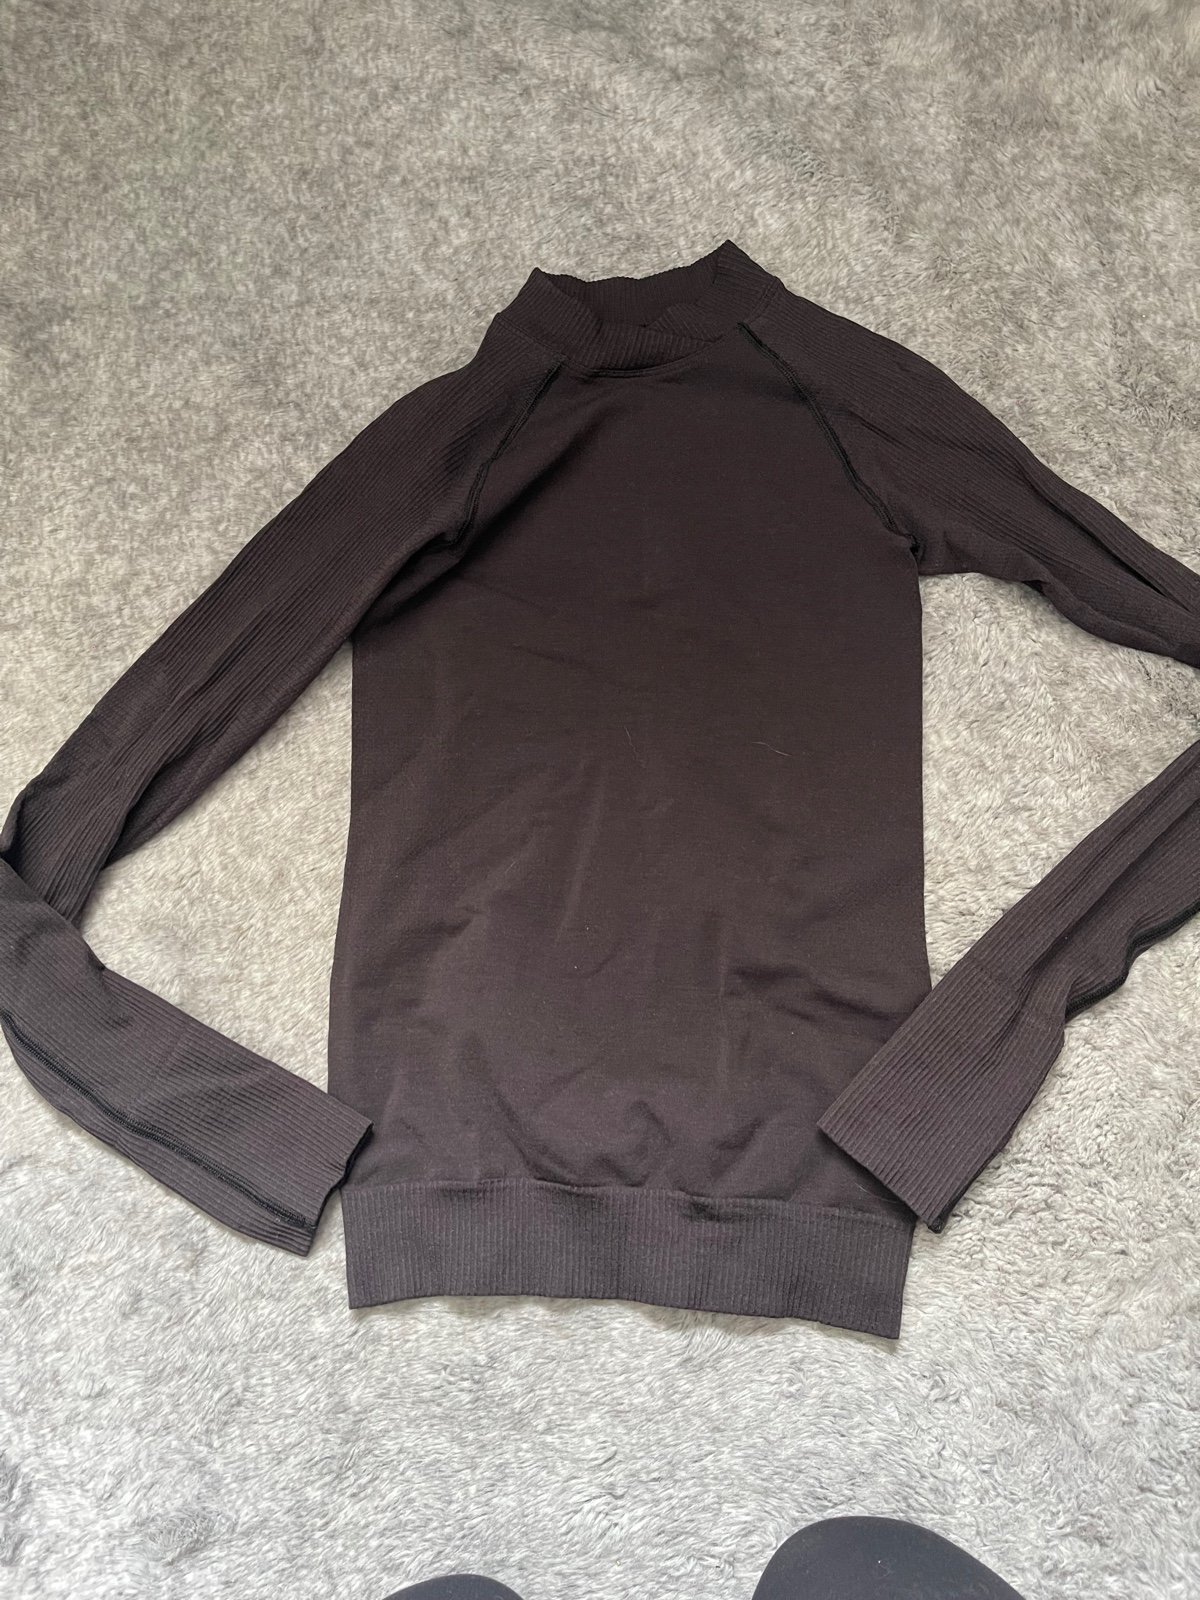 Classic Lululemon Rest Less Mock Neck MhZeQytWD for sal